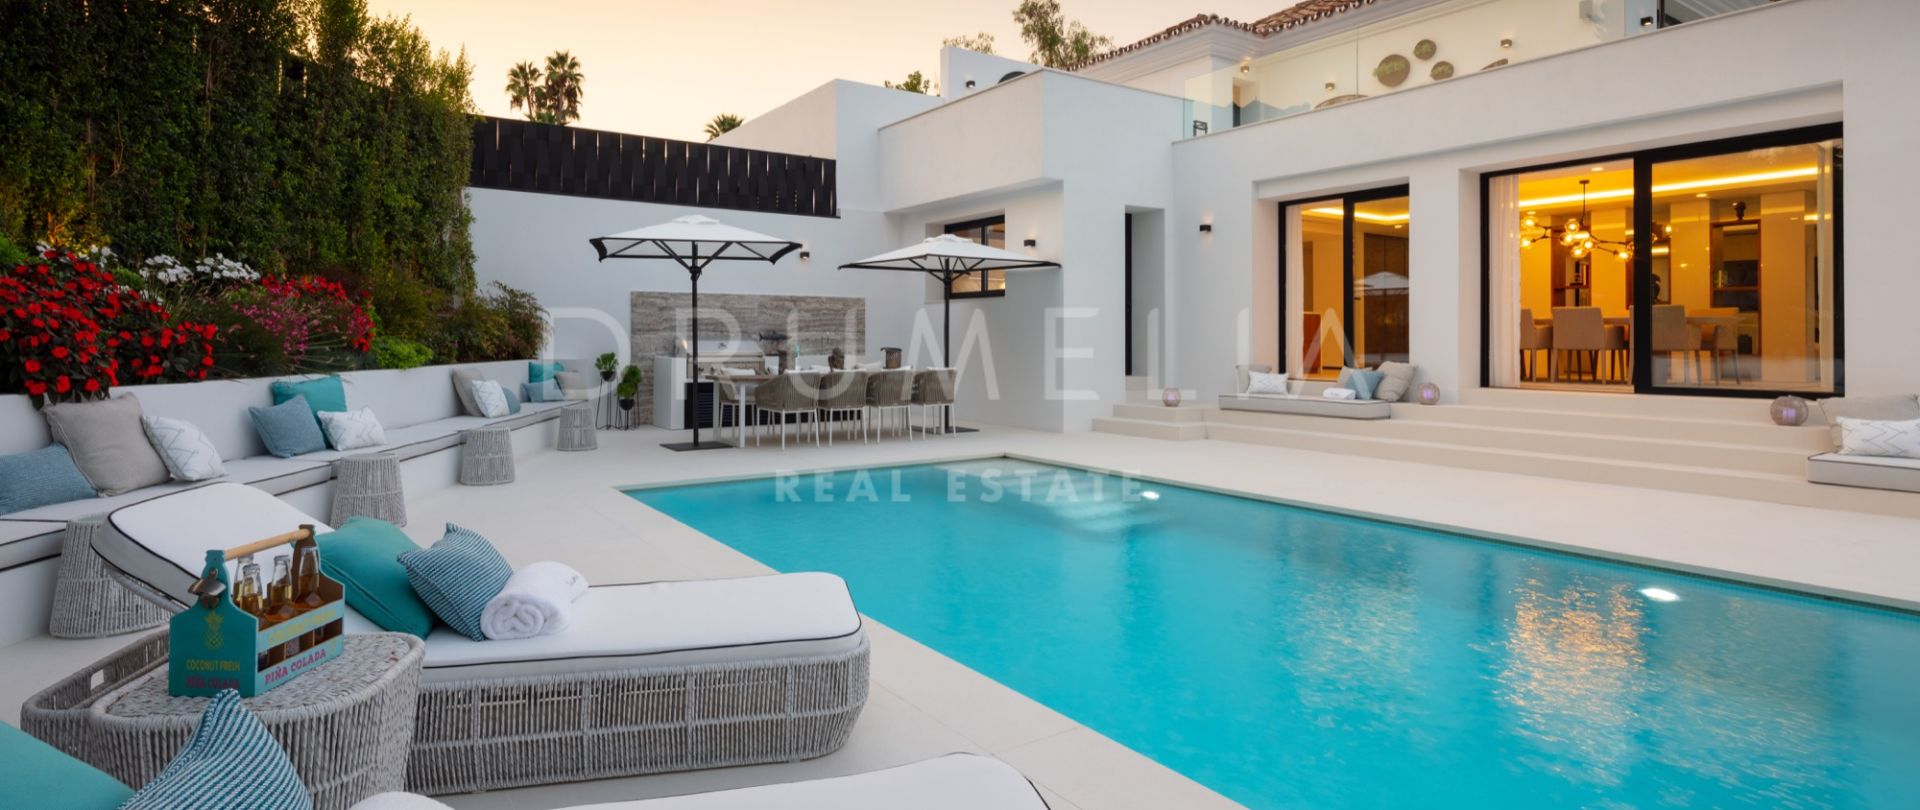 Lotus 5 - Fabulous Modern Style High-End Villa with in Golf Valley of Nueva Andalucía